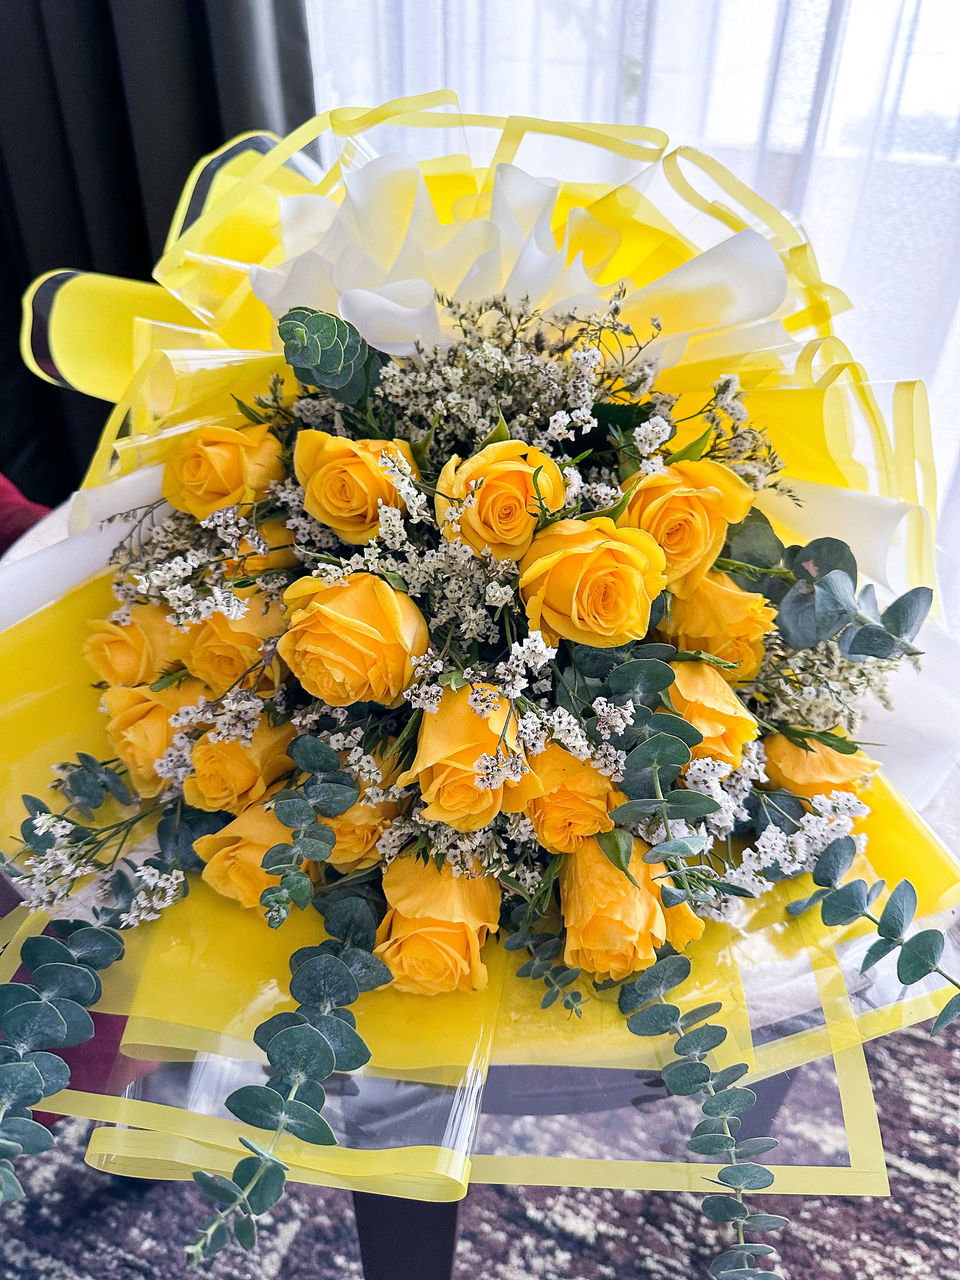 yellow, flowering plant, flower, plant, bouquet, floristry, freshness, floral design, nature, centrepiece, flower arrangement, no people, cut flowers, indoors, flower head, food and drink, beauty in nature, food, high angle view, celebration, table, decoration, arrangement, bunch of flowers